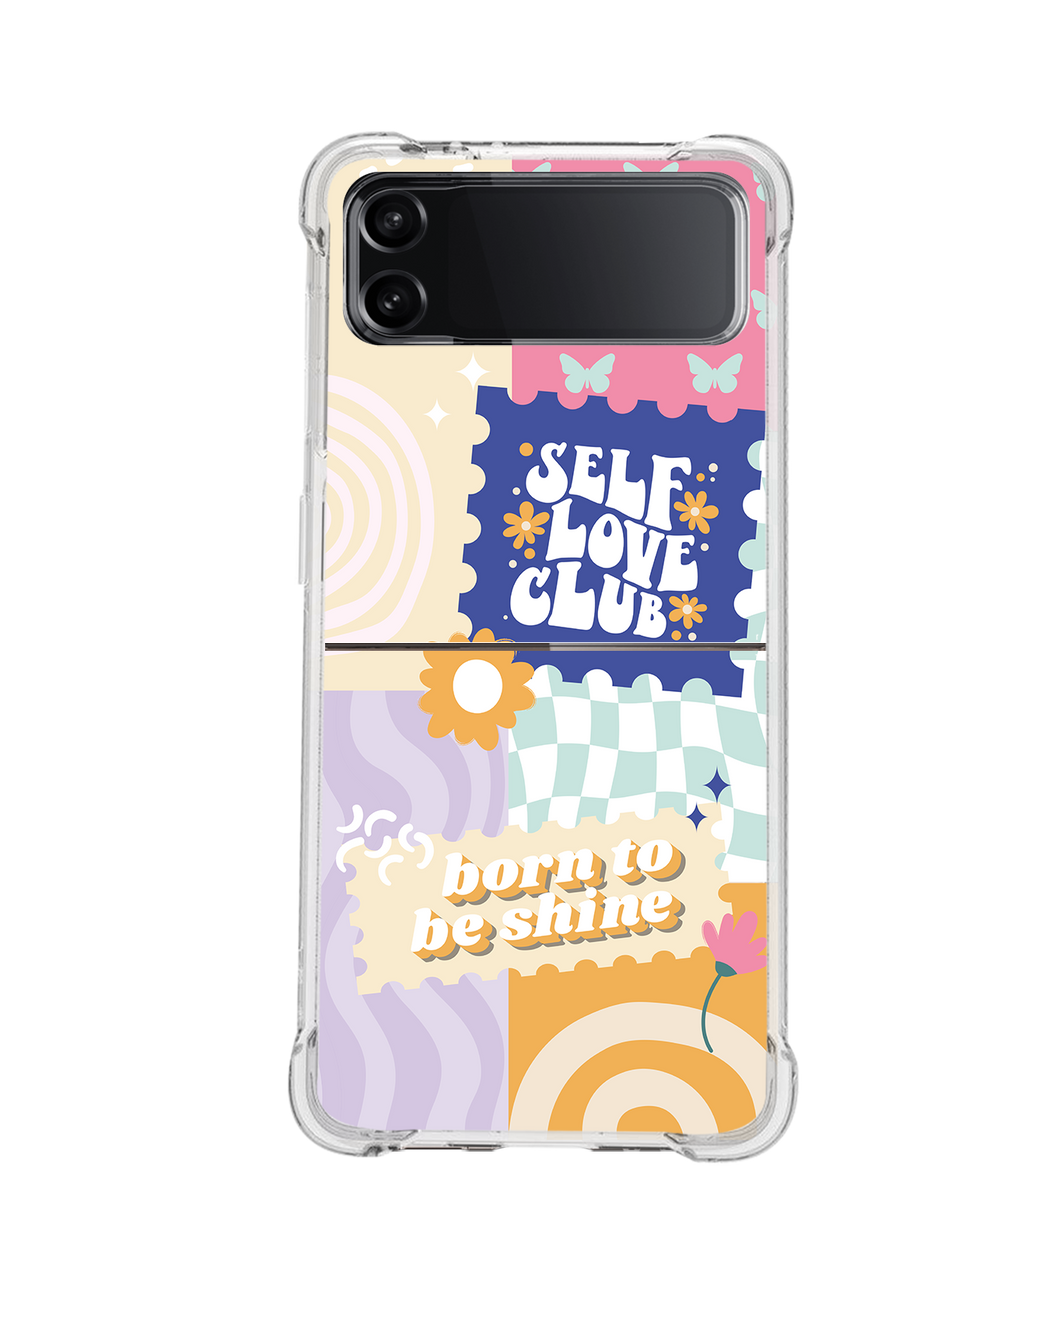 Android Flip / Fold Case - Abstract Quotes 7.0